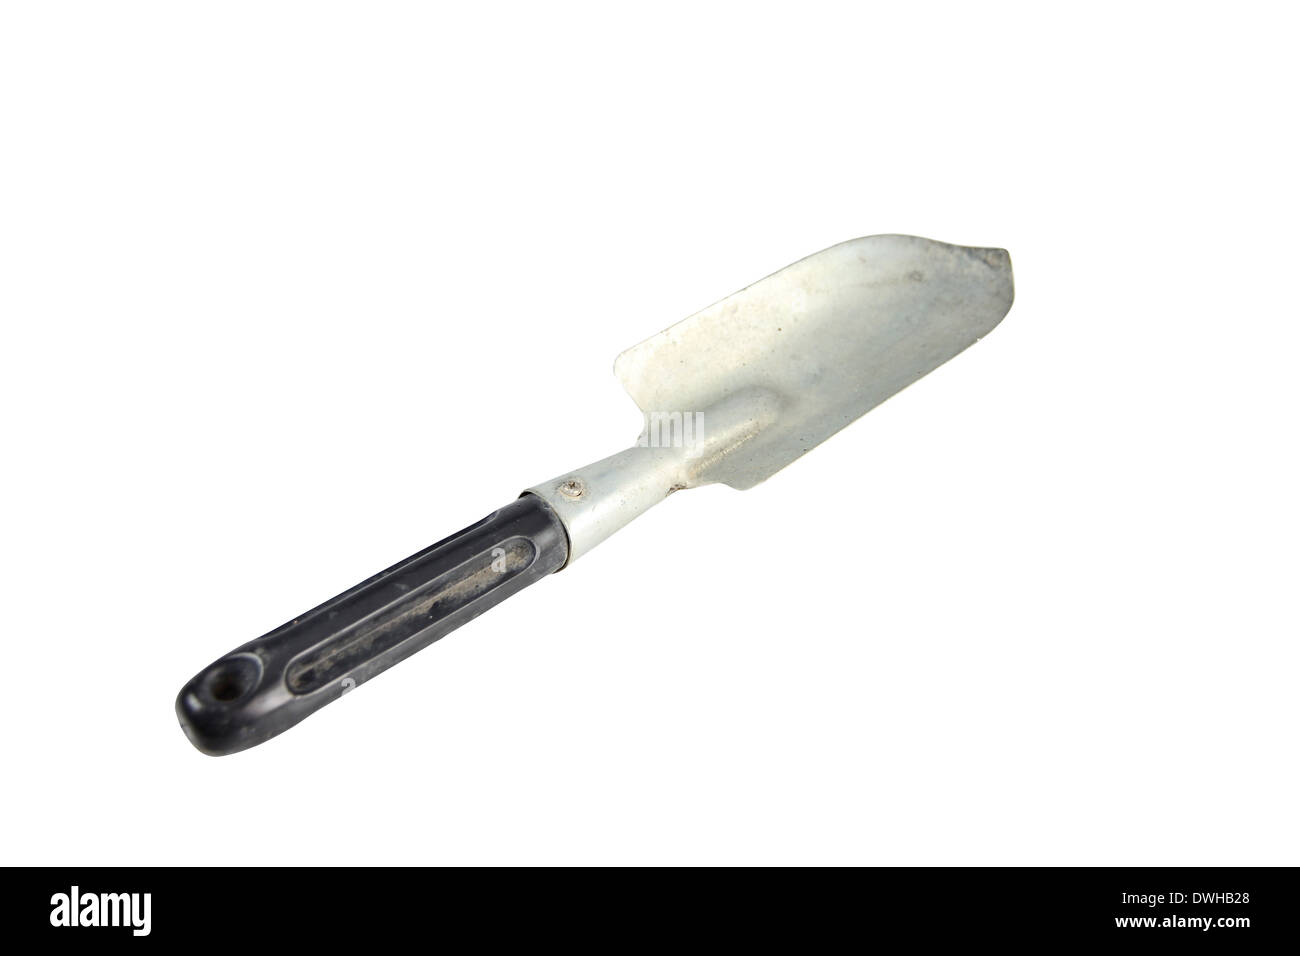 Garden tool trowel isolated on white background. Stock Photo